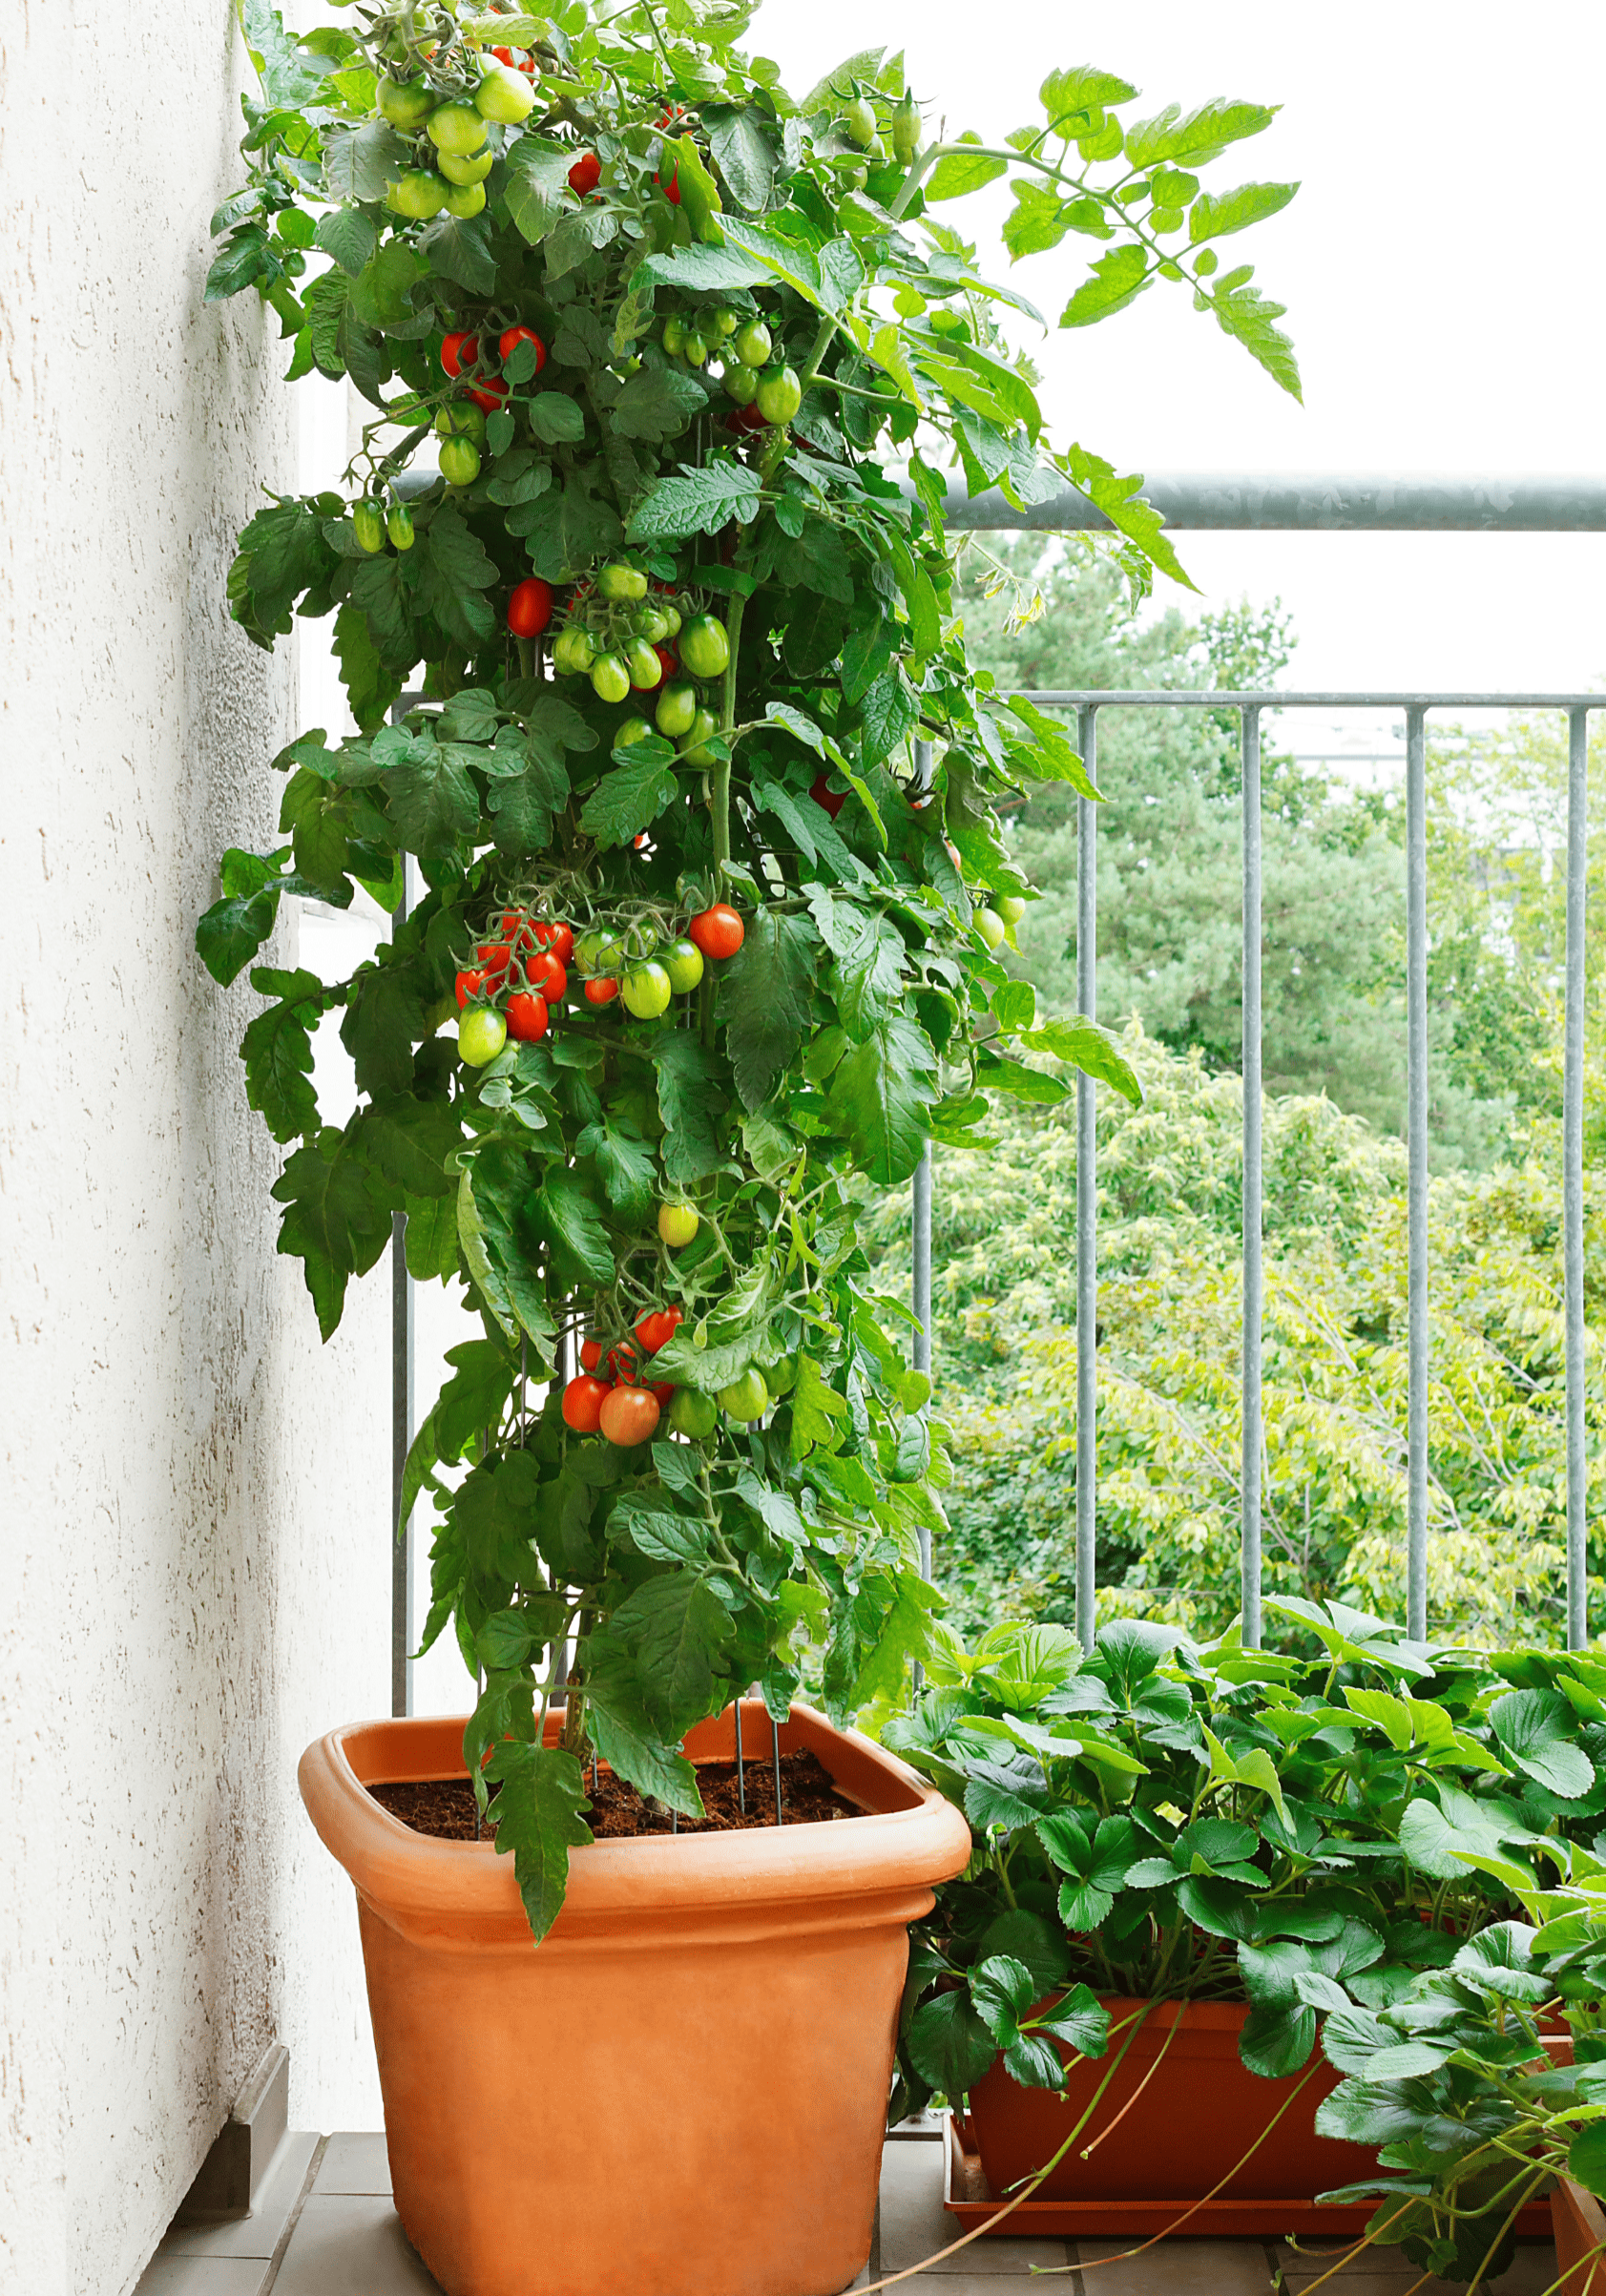 tomato growing in pot on patio